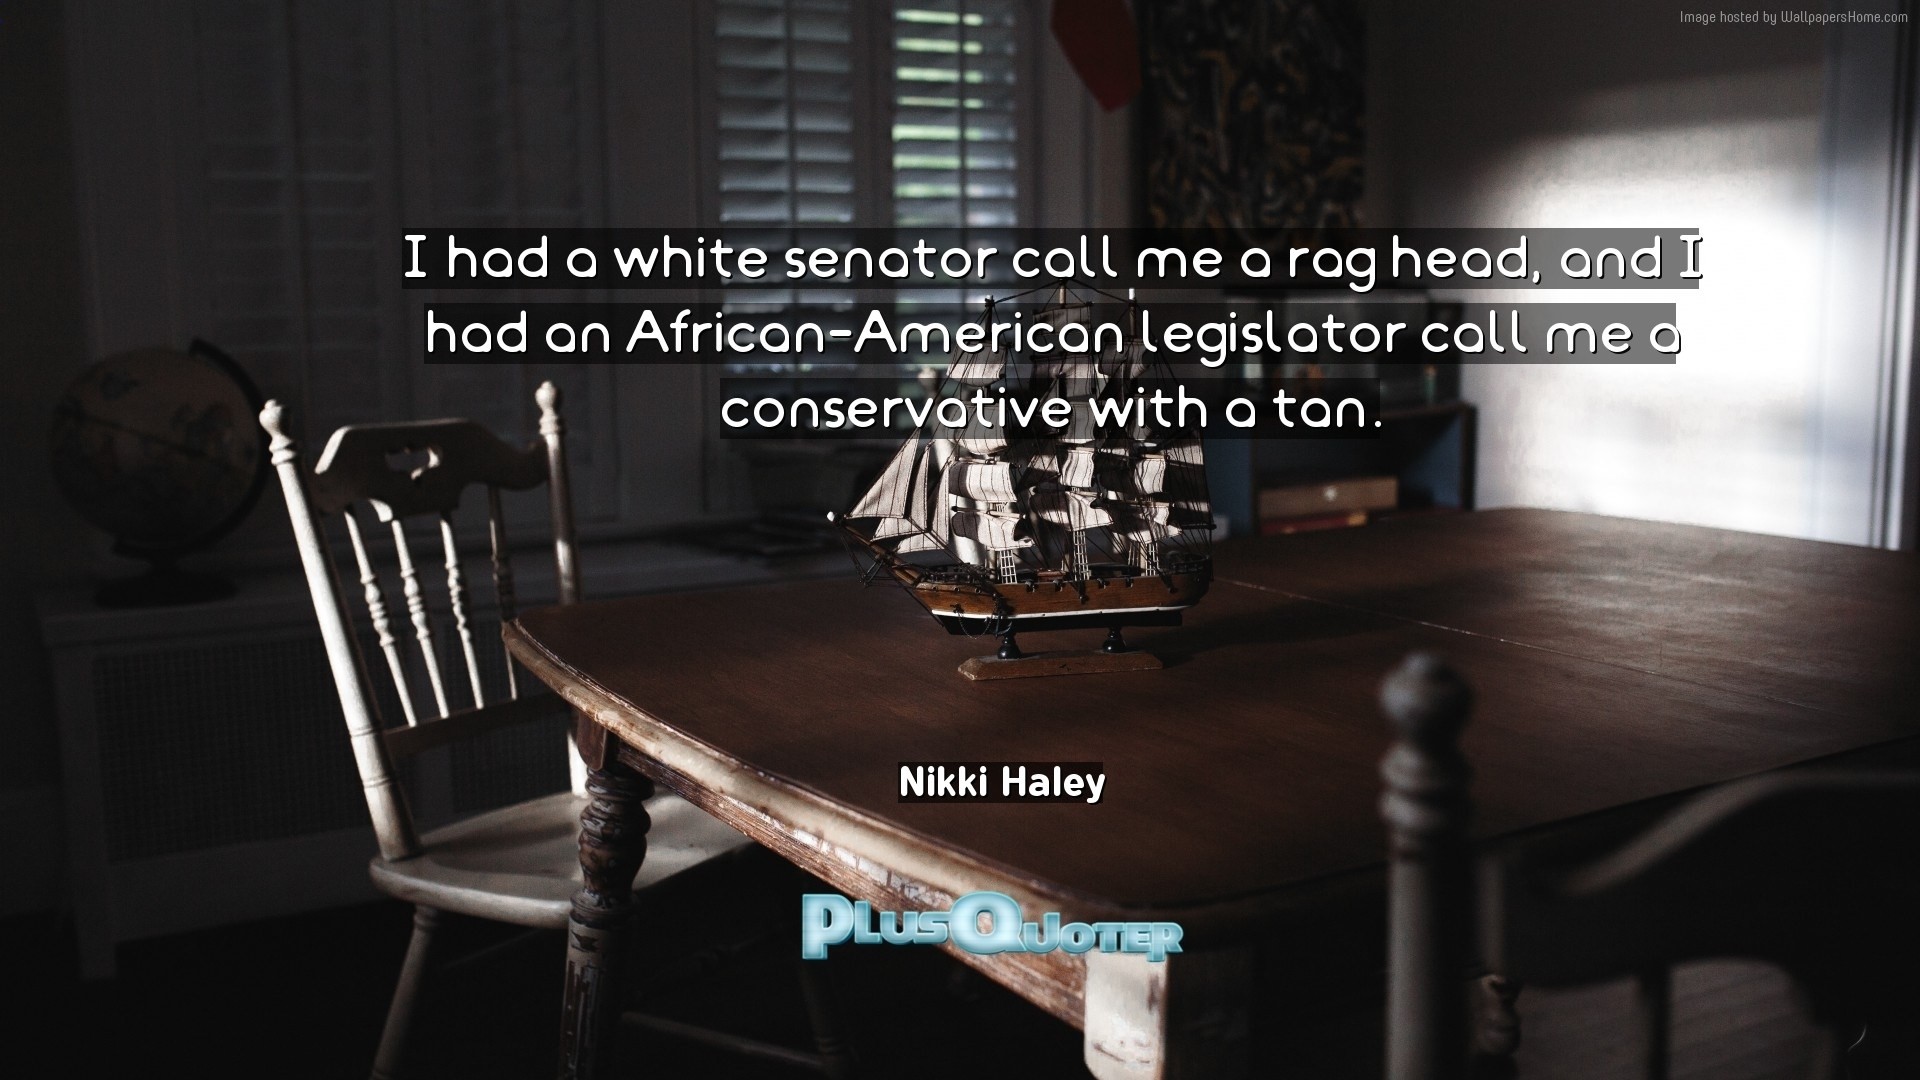 1920x1080 Download Wallpaper with inspirational Quotes- "I had a white senator call  me a rag. “